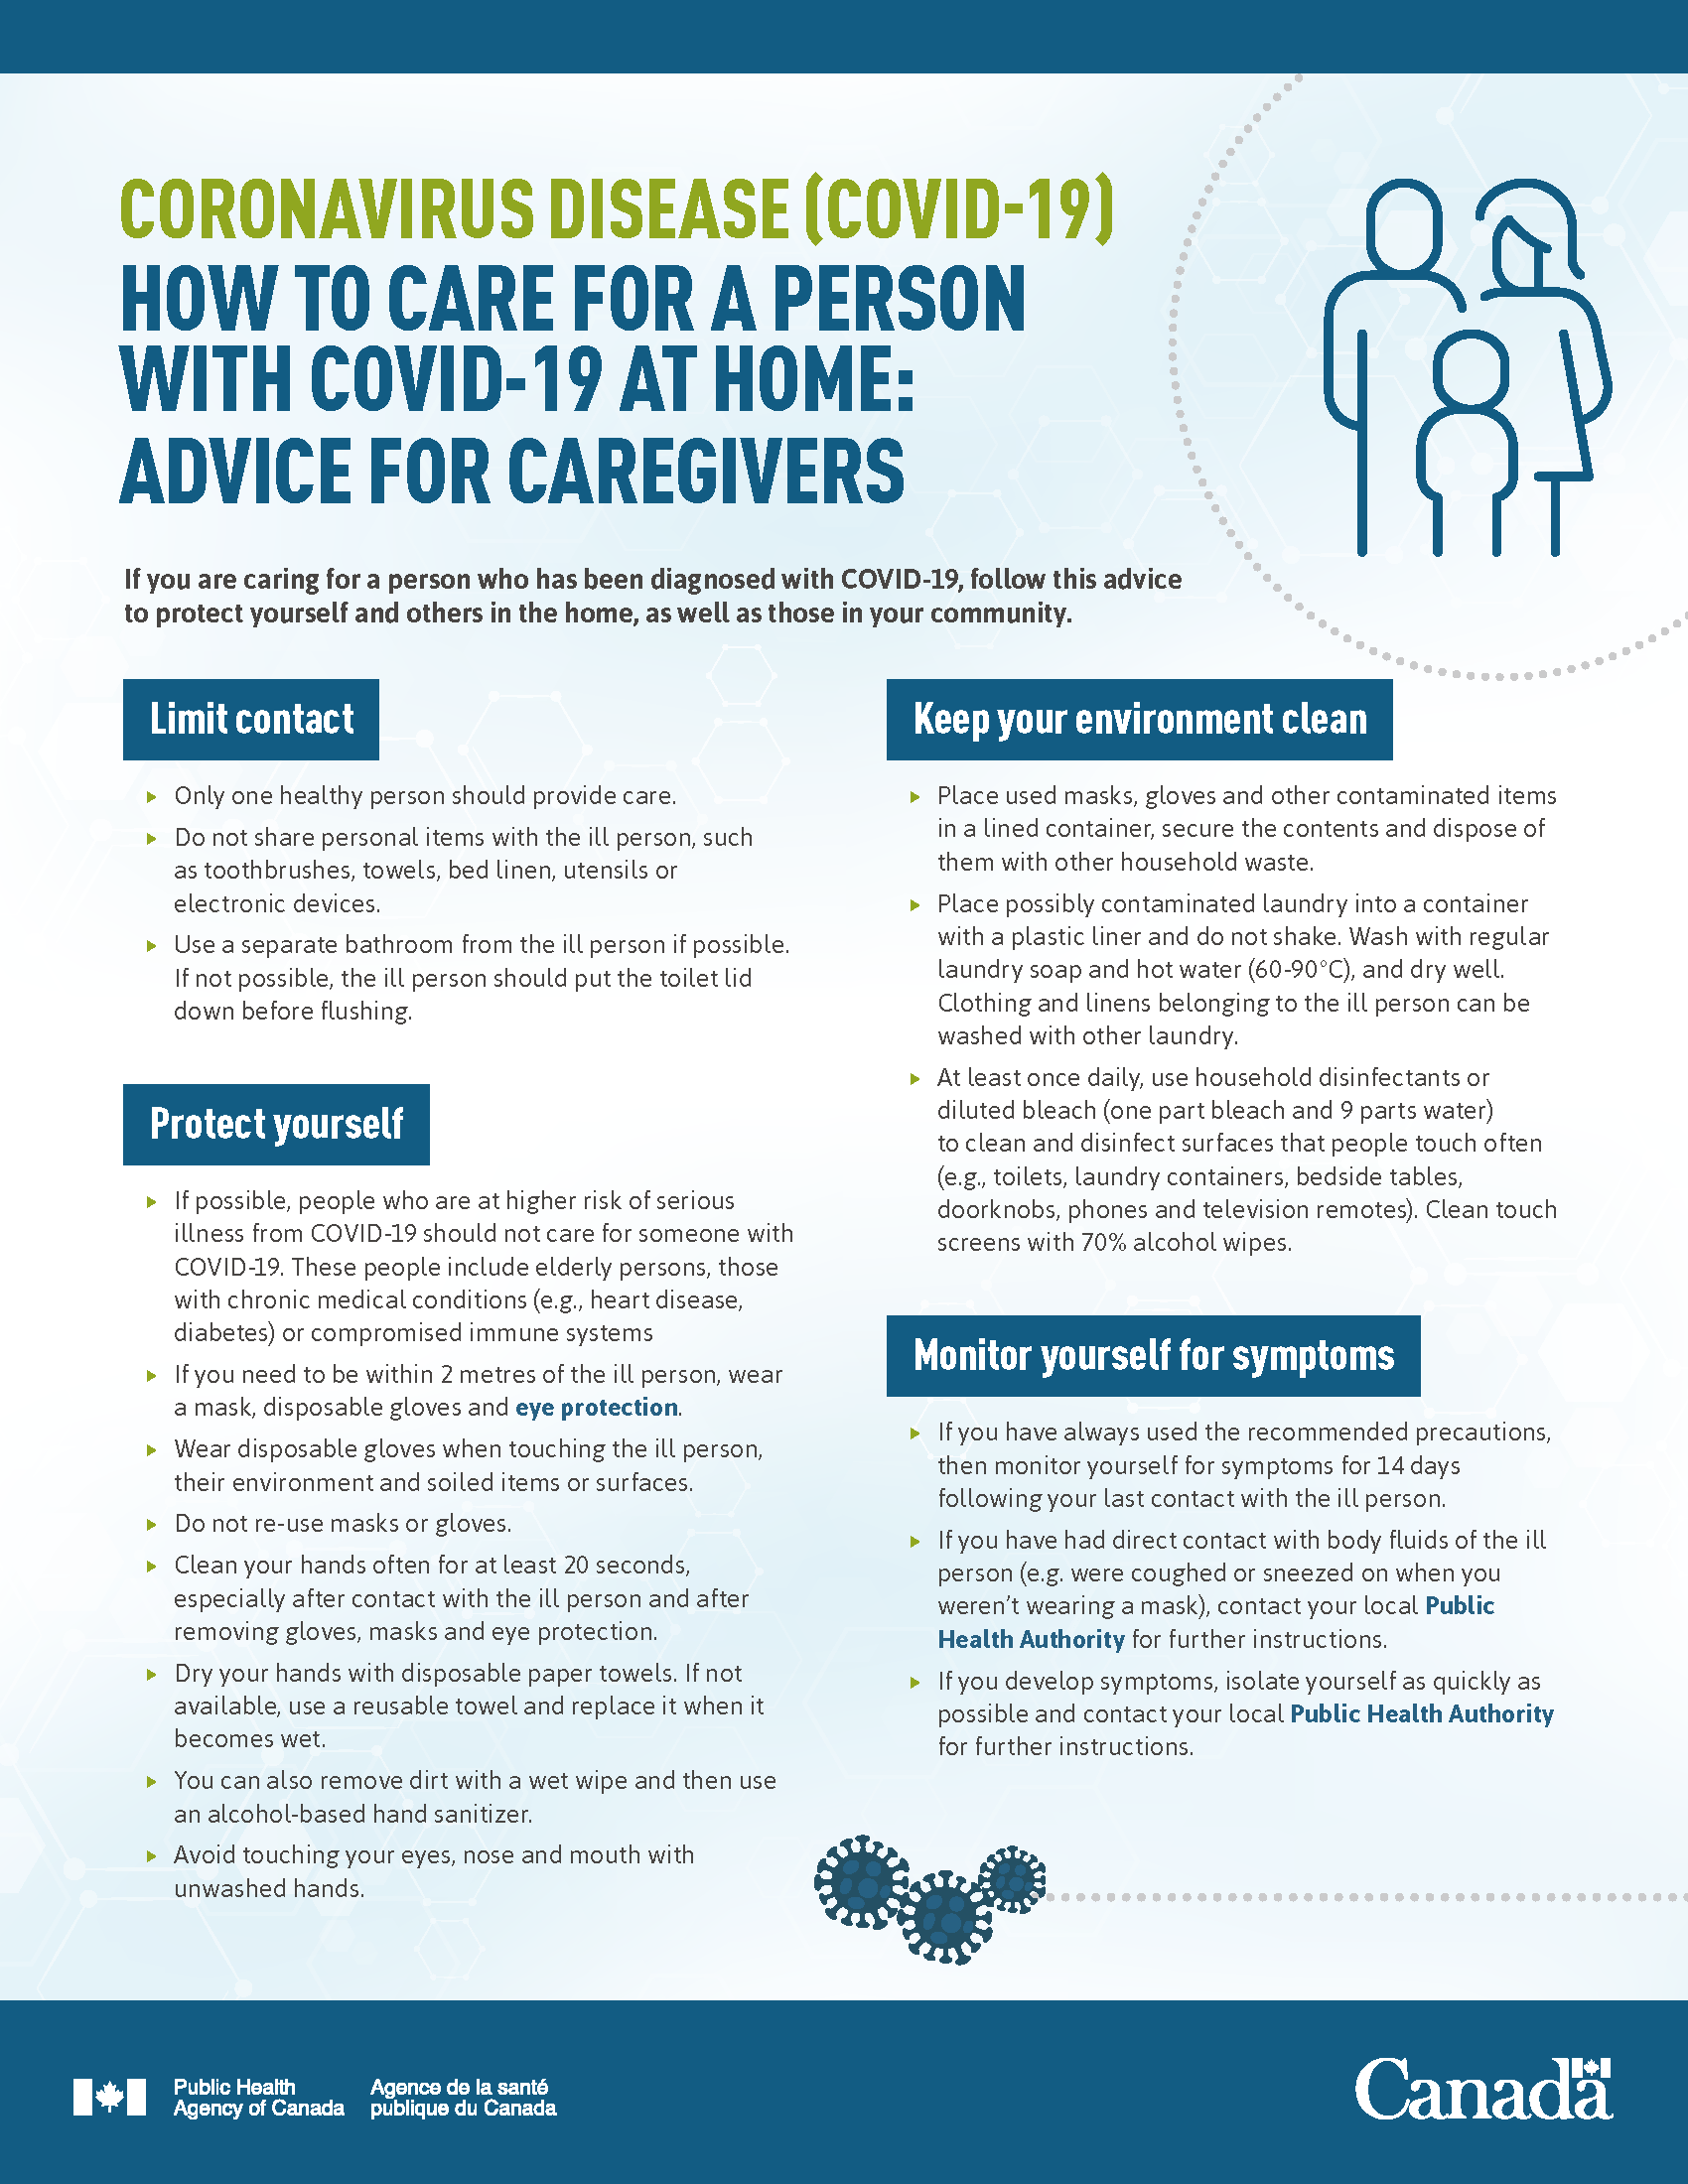 20200312-HOW_TO_CARE_FOR_A_PERSON_WITH_COVID-19_AT_HOME_ADVICE_FOR_CAREGIVERS_1.png